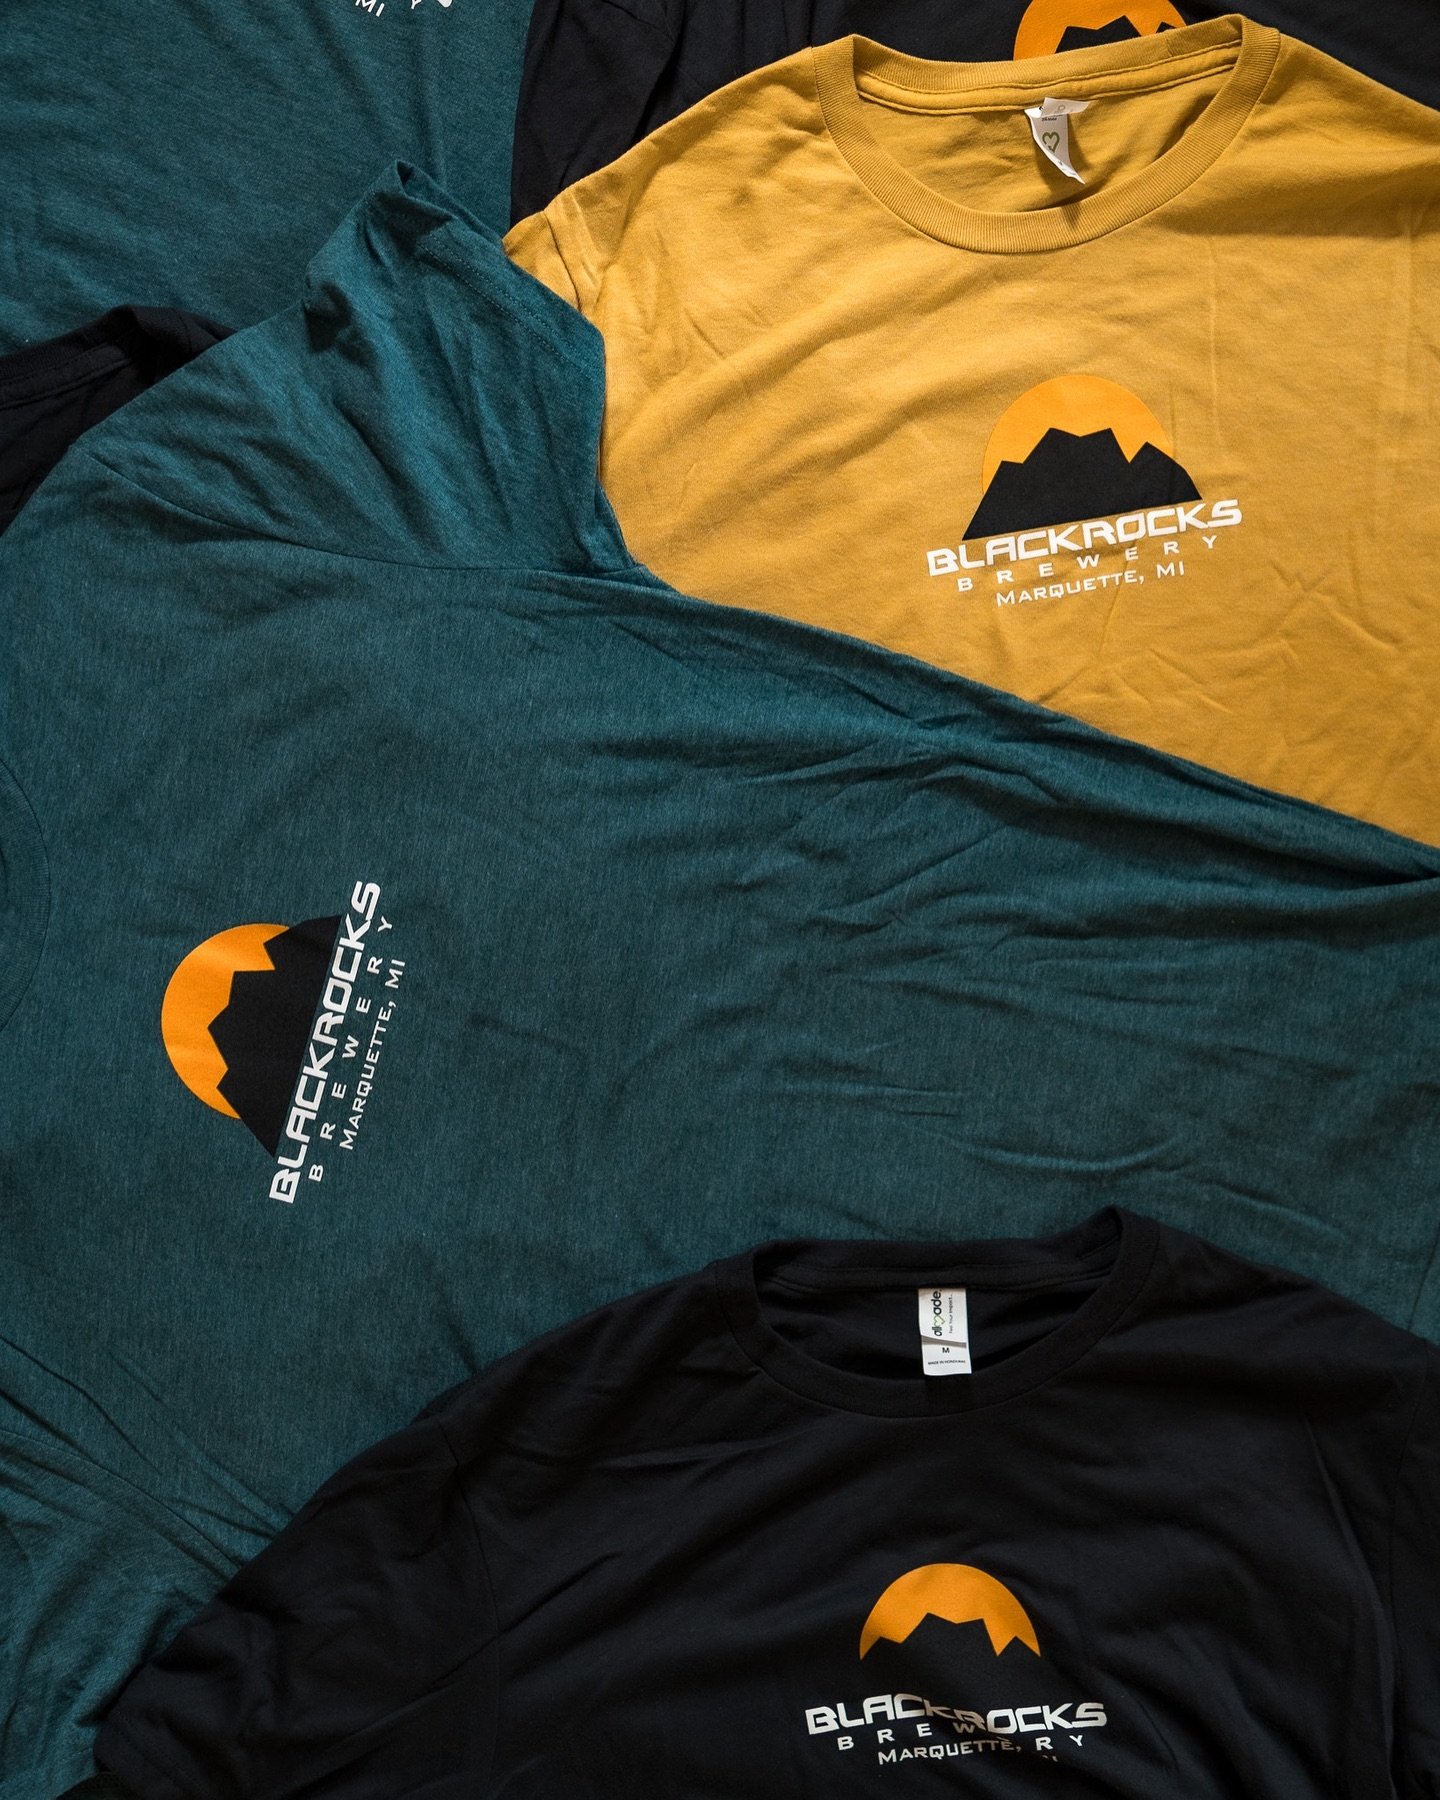 Fresh stock and a couple new colors for the Logo T shirt. 

We print our standard logo T on @allmadeapparel tri-blend shirts. Each shirt has an average of 6 recycled plastic water bottles in it, while also using less water and reduced C02 emissions. 